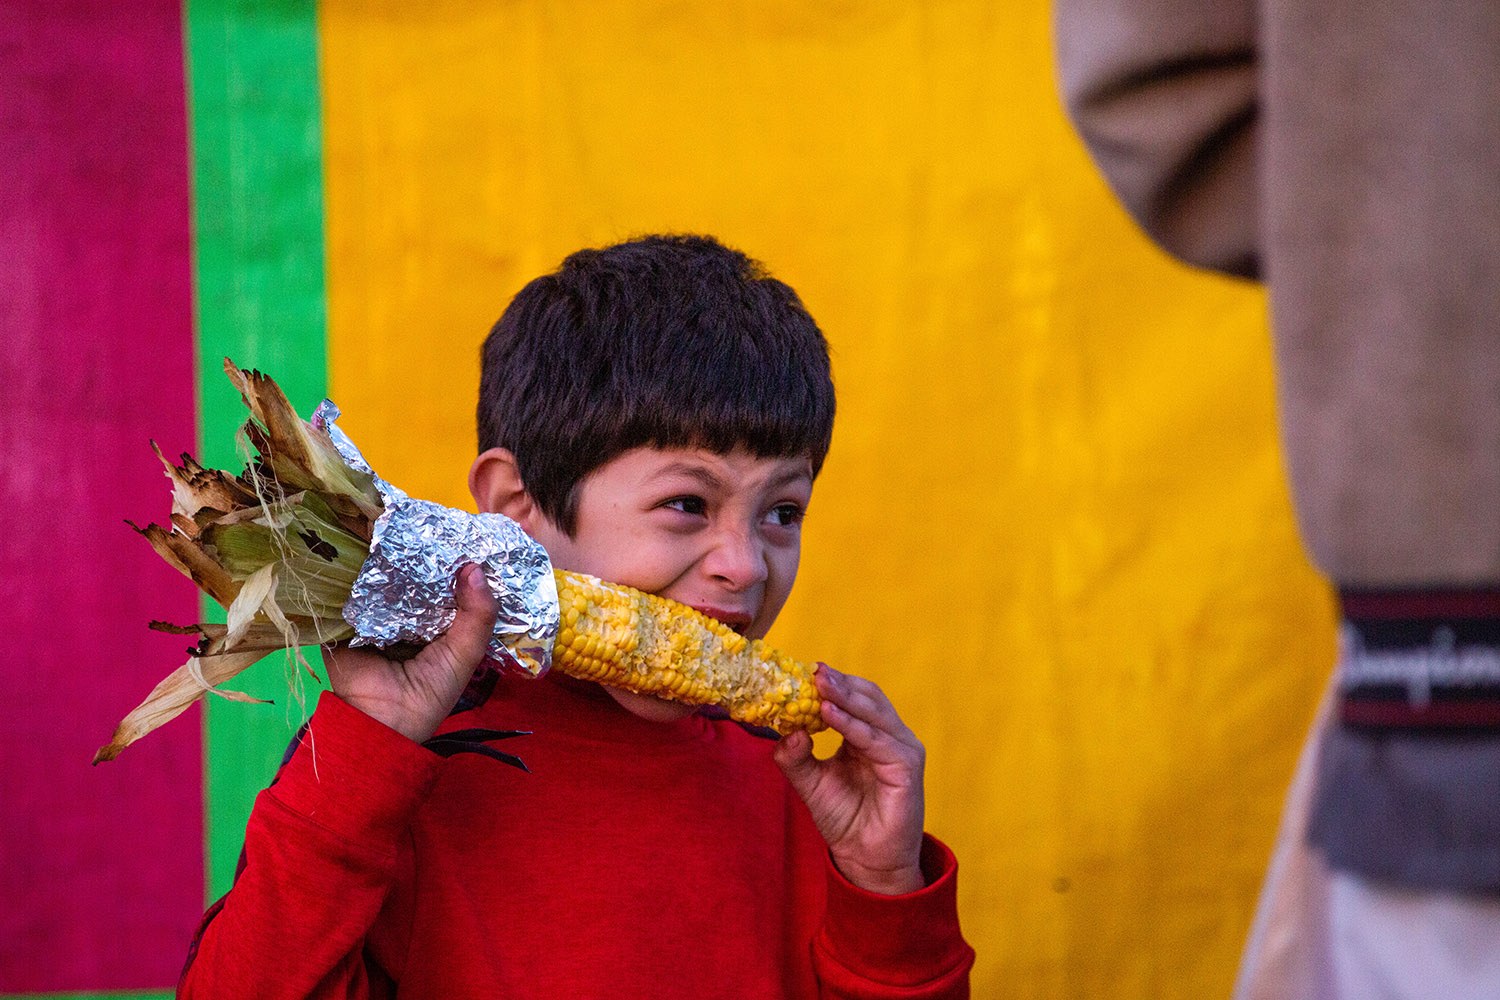 A boy enjoys corn at the San Antonio Stock Show and Rodeo carnival on Friday, Feb. 18, 2022. Photo by Kaylee Greenlee Beal | Heron contributor